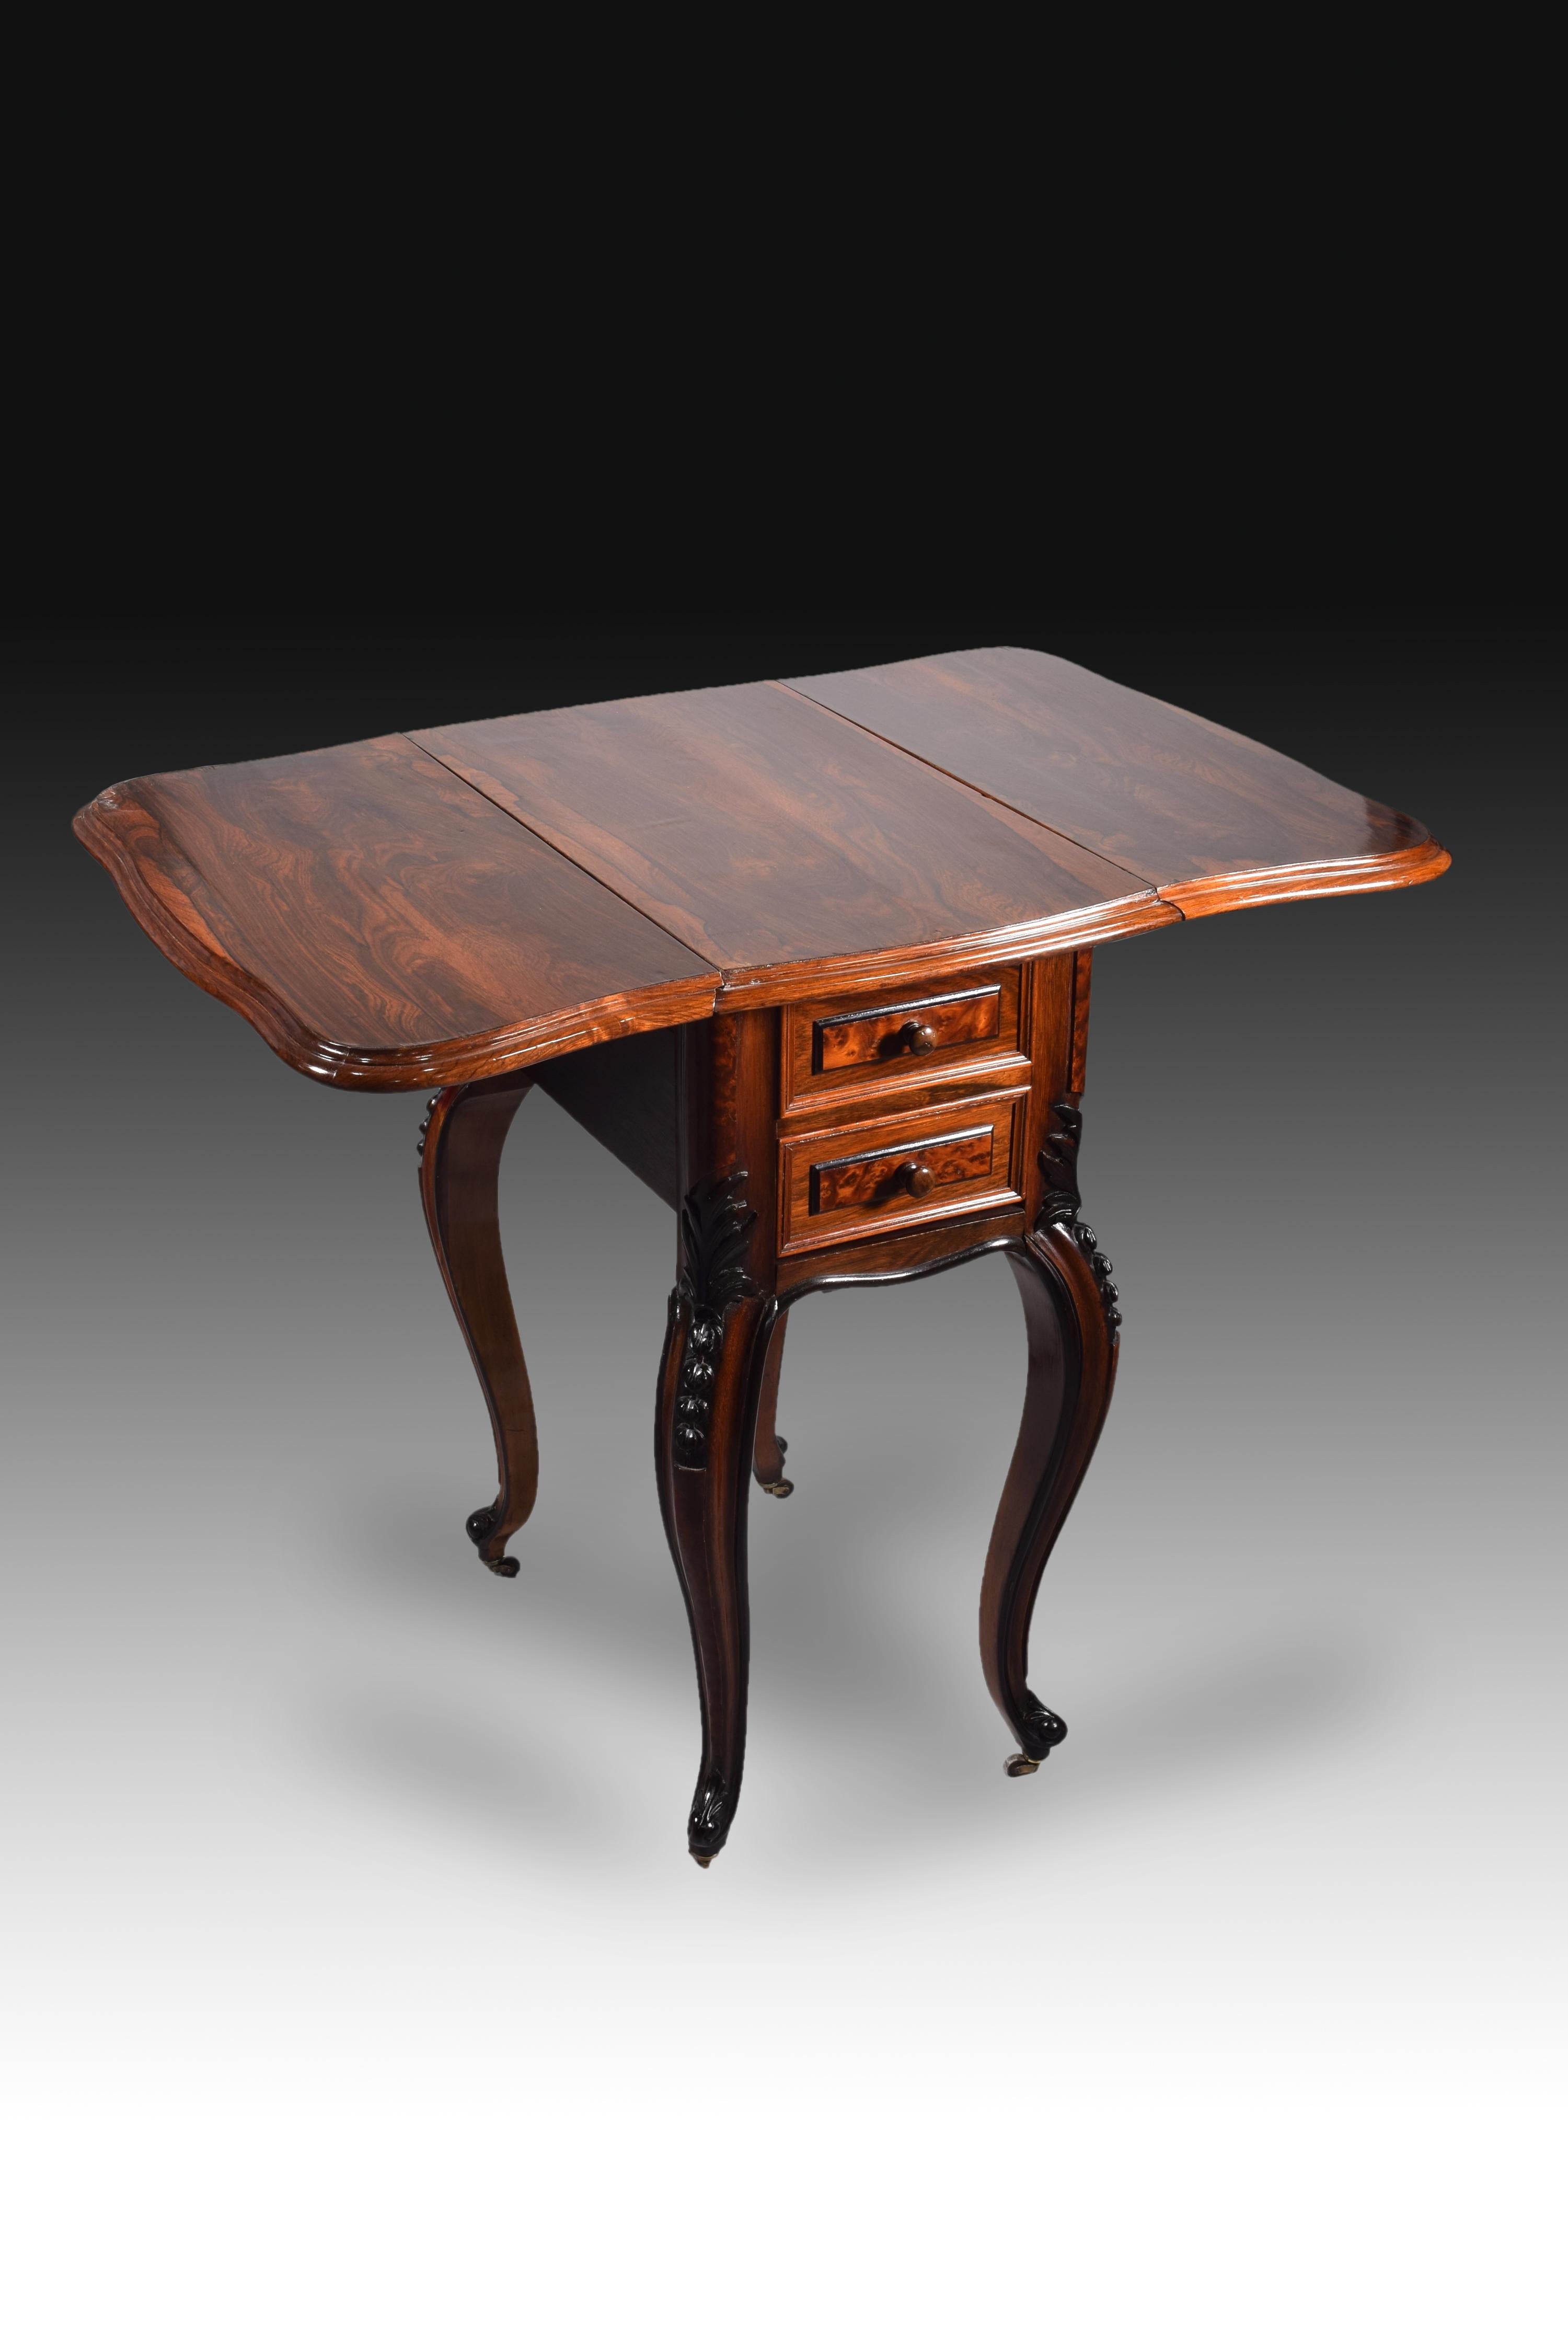 Sewing Table with Wings, Palosanto or Rosewood Wood, 19th Century For Sale 7